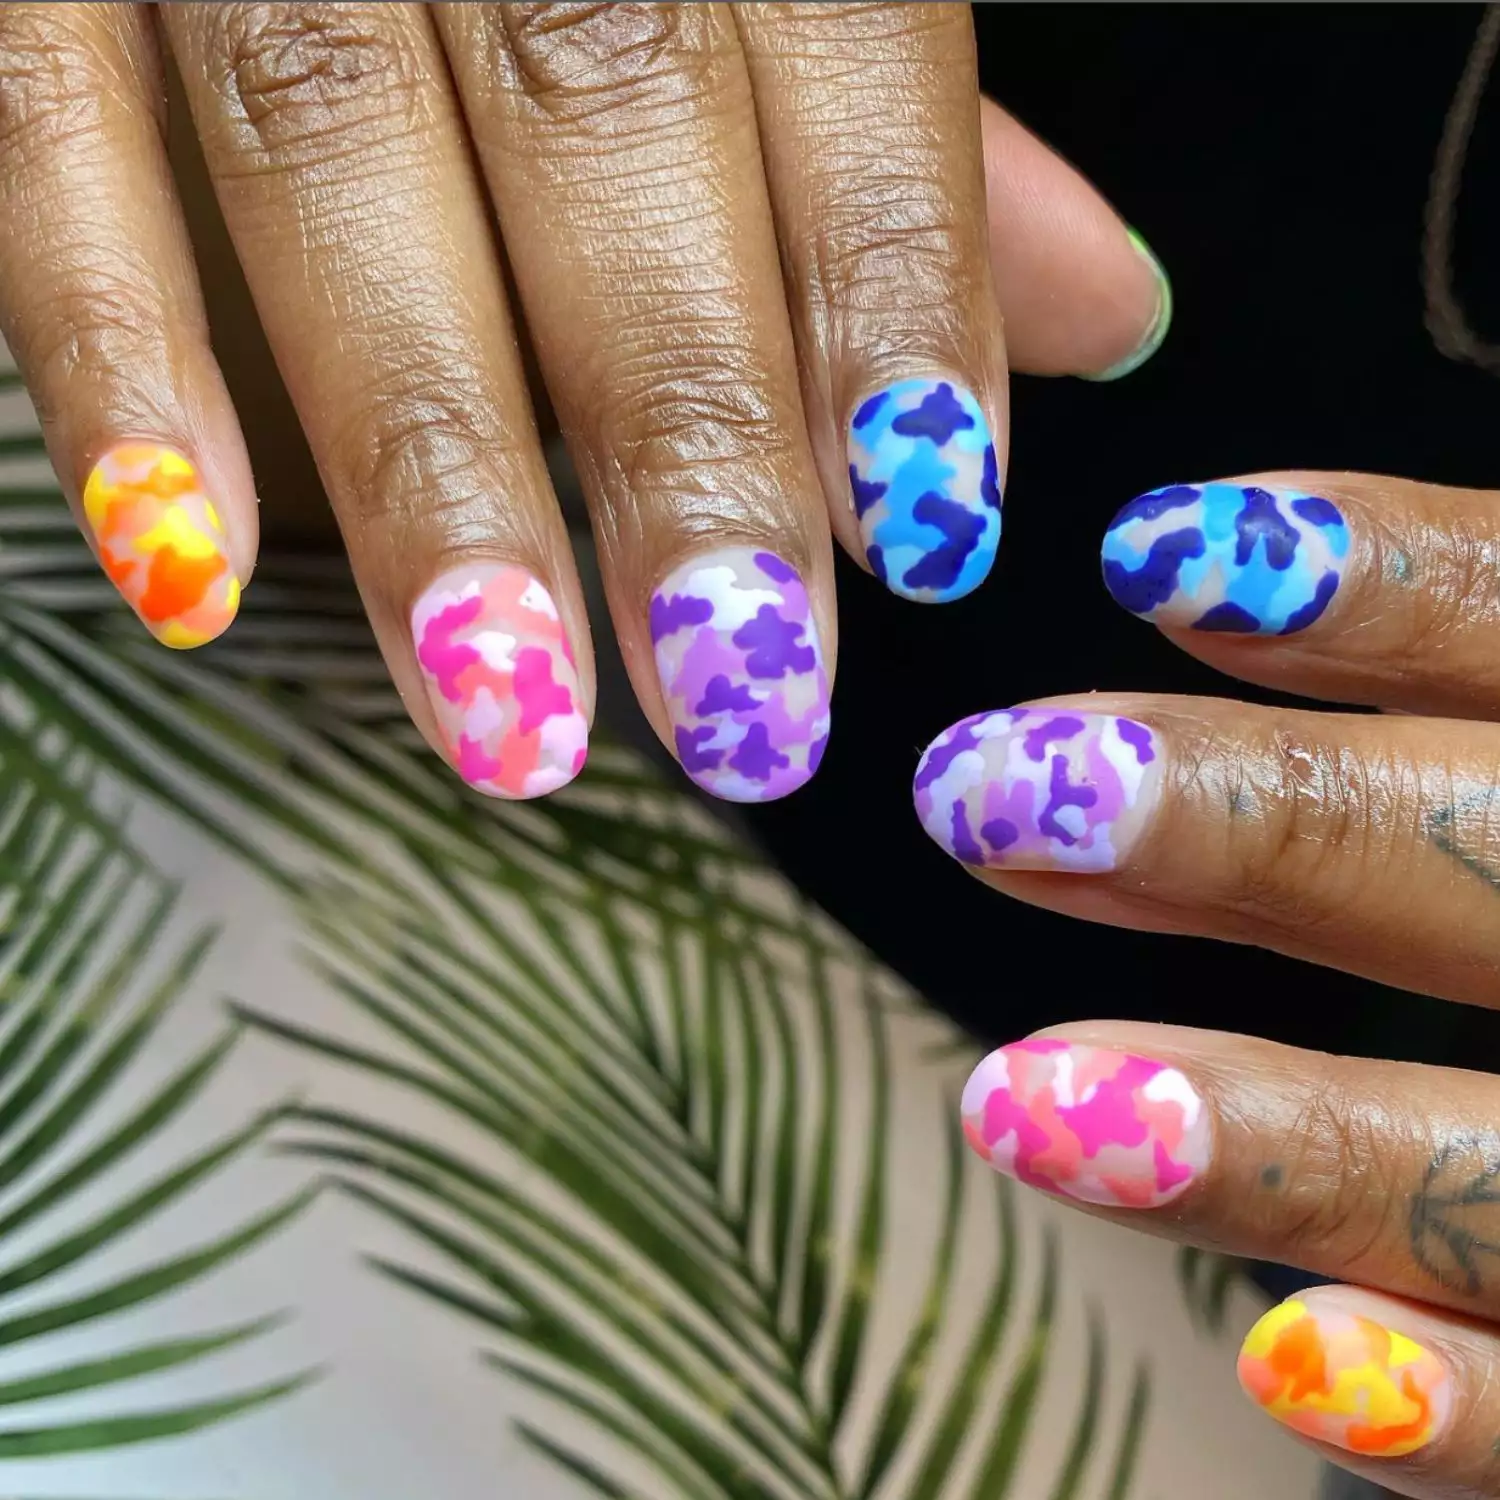 Camouflage print nails in neon green, blue, purple, pink, and orange